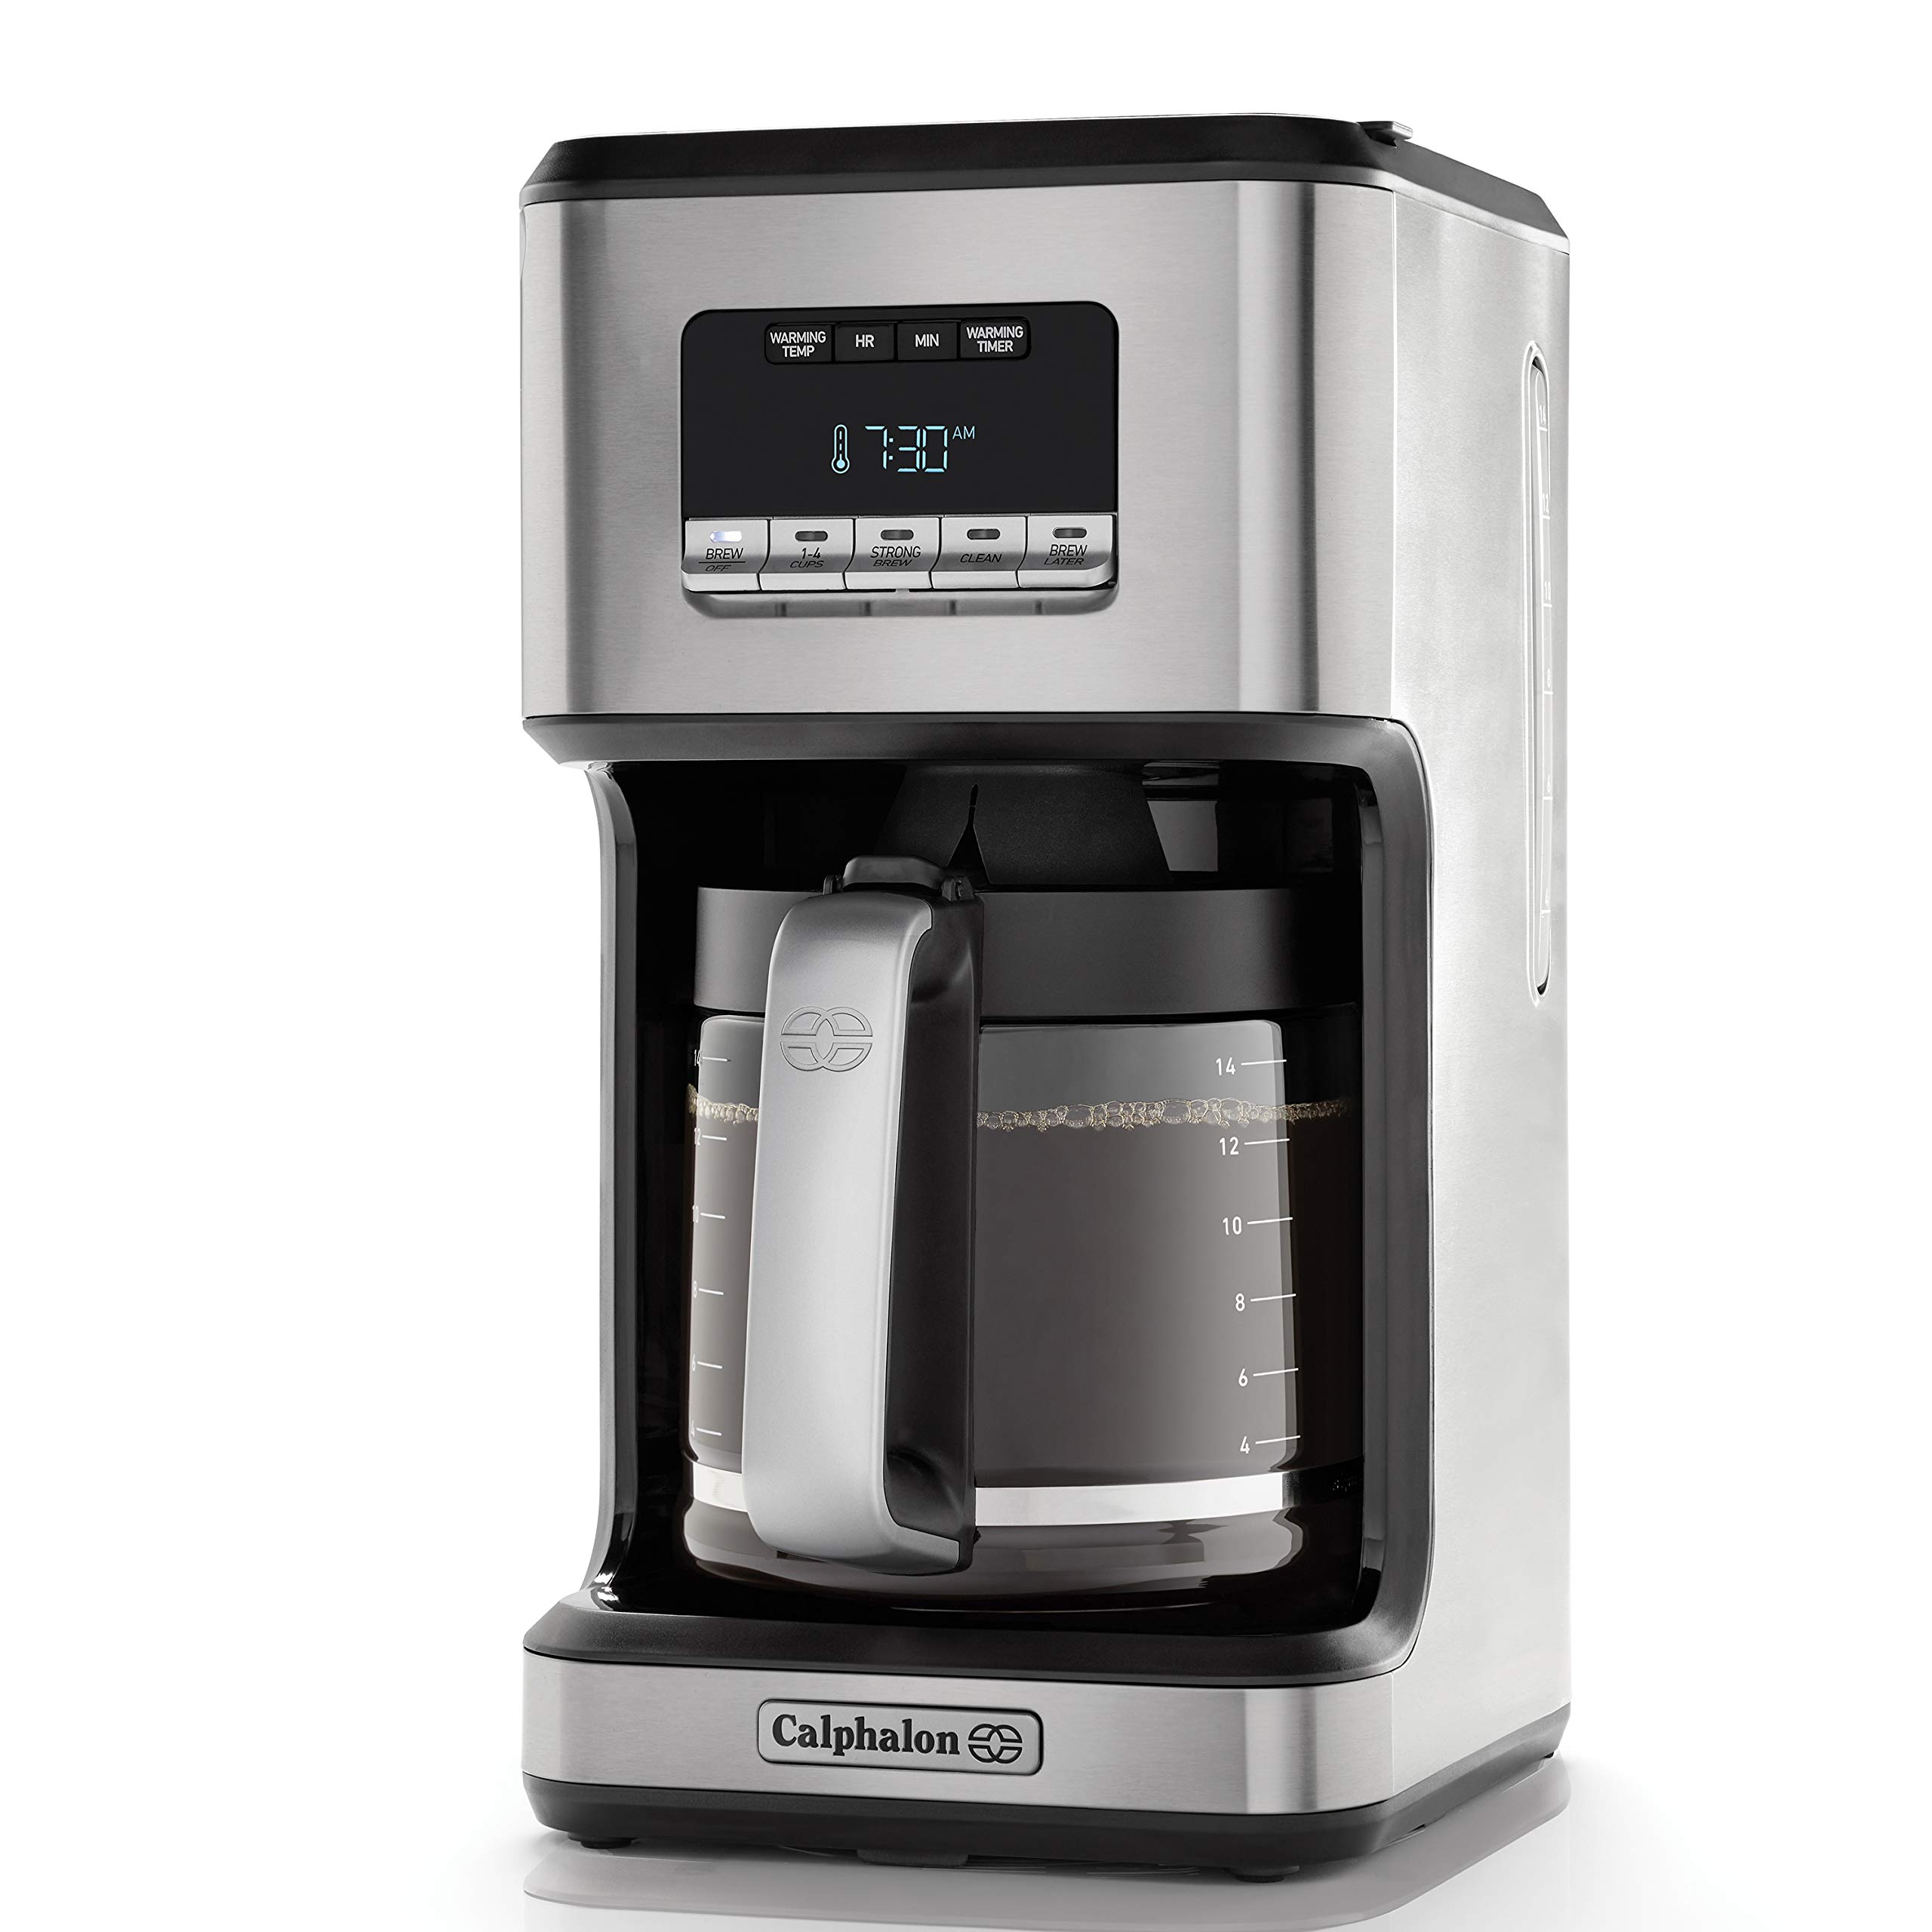 14-Cup Calphalon Programmable Coffee Maker w/ Glass Carafe (Stainless Steel) $42.47 + Free Shipping